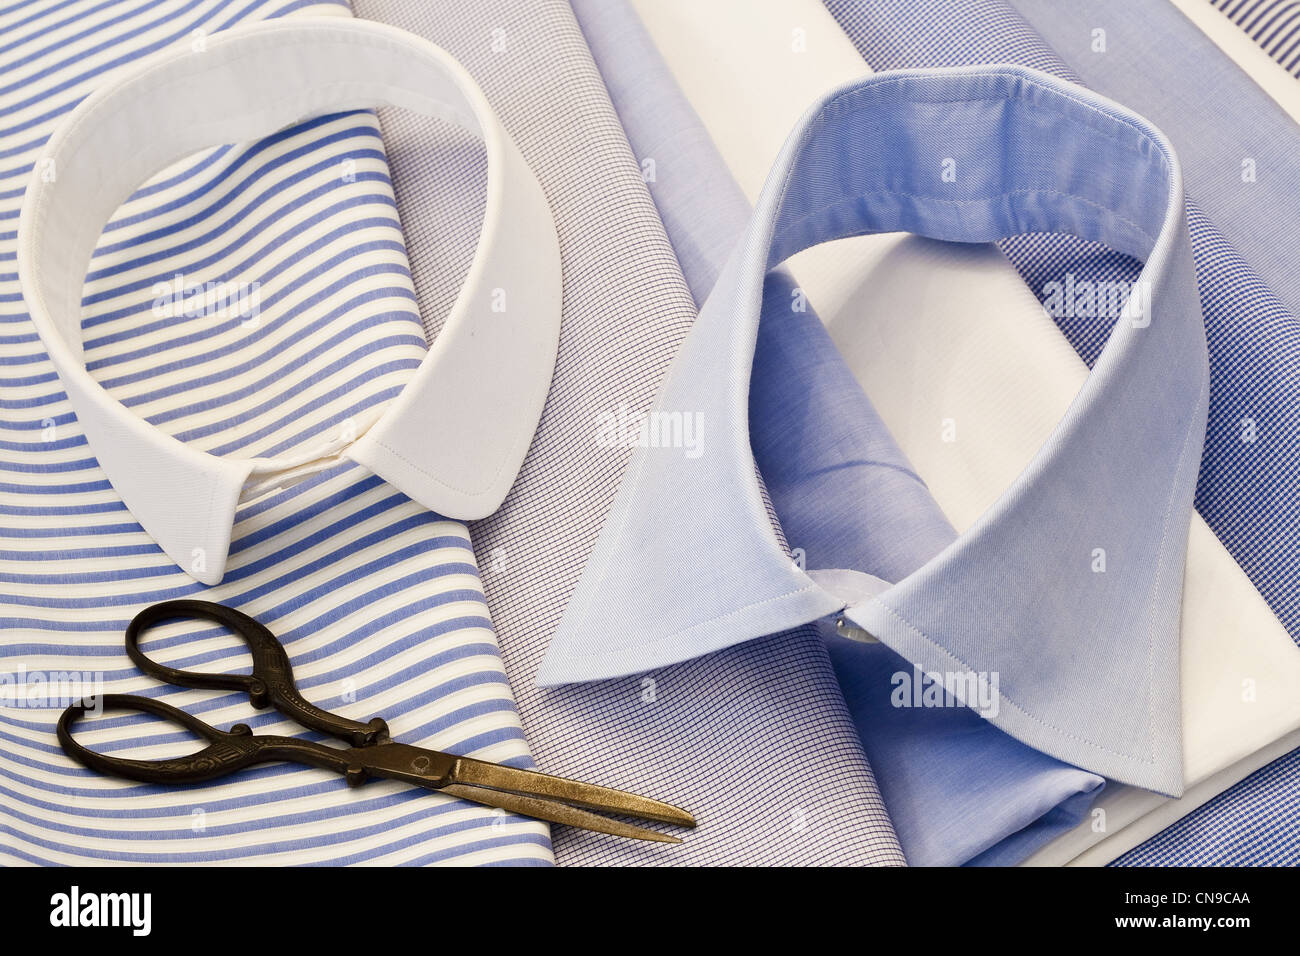 Italy, Campania, Naples, viale Gramsci, Camiceria Anna Matuozzo, a  30-year-old shop specializing in custom-made shirts and ties Stock Photo -  Alamy